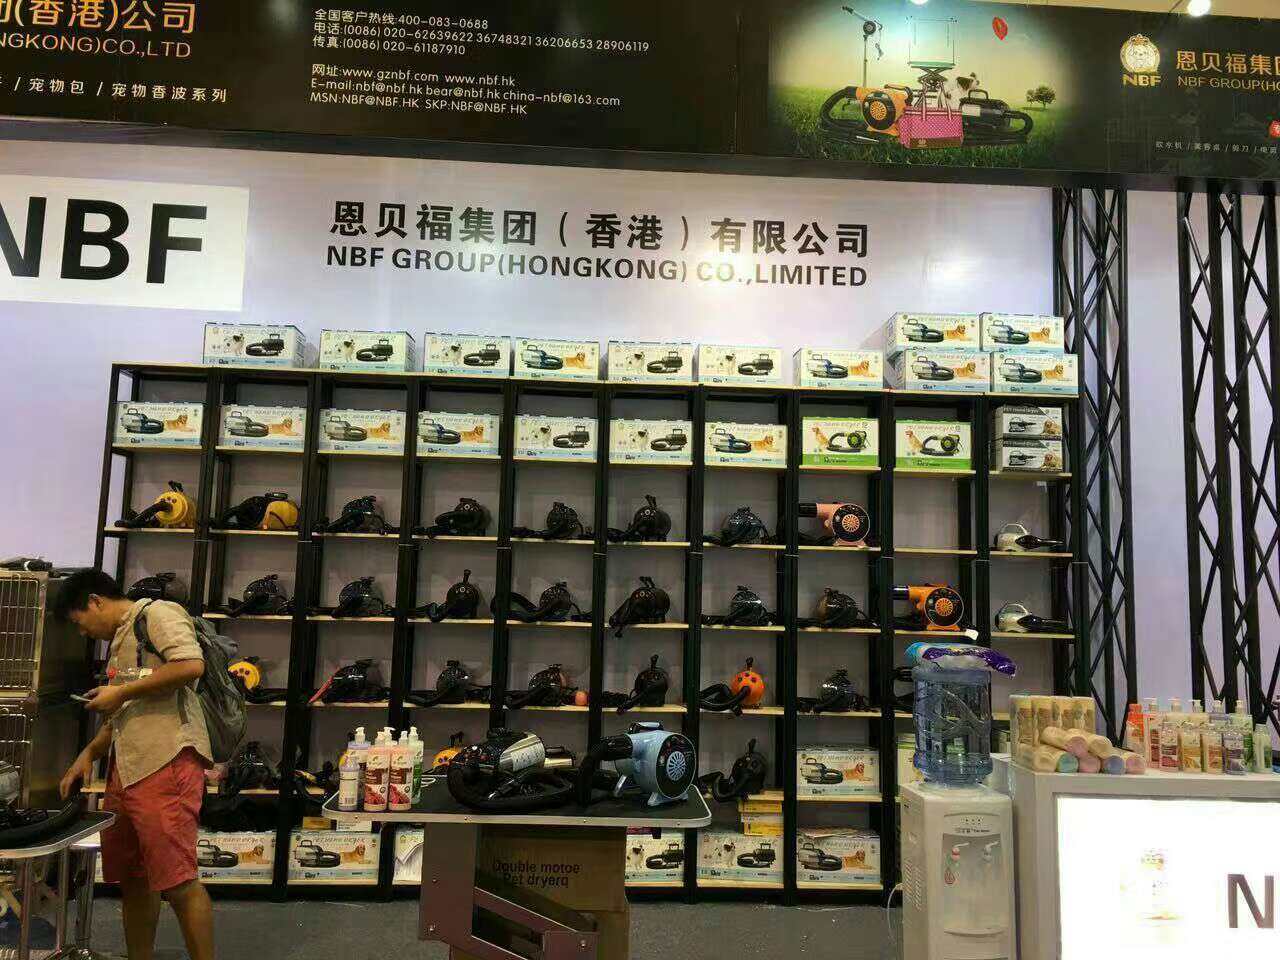 Warmly congratulate Shanghai Asian Beloved Exhibition Enbev Group on its success!